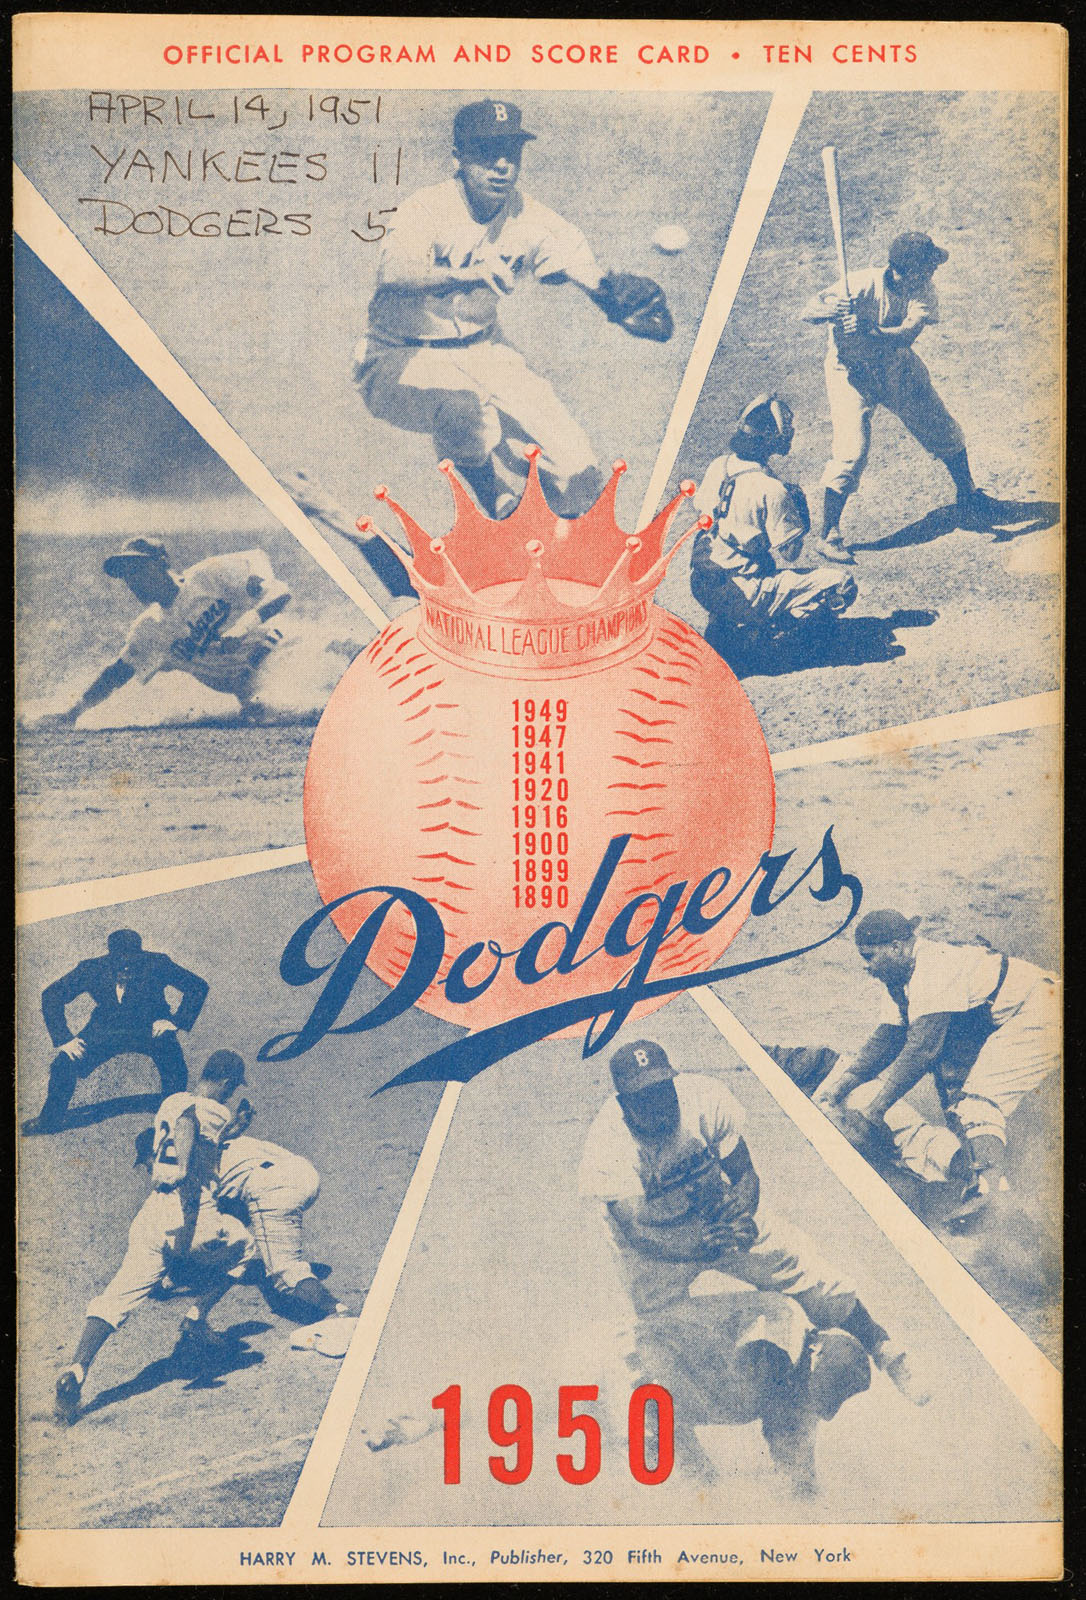 Sold at Auction: VINTAGE BROOKLYN DODGERS POSTER